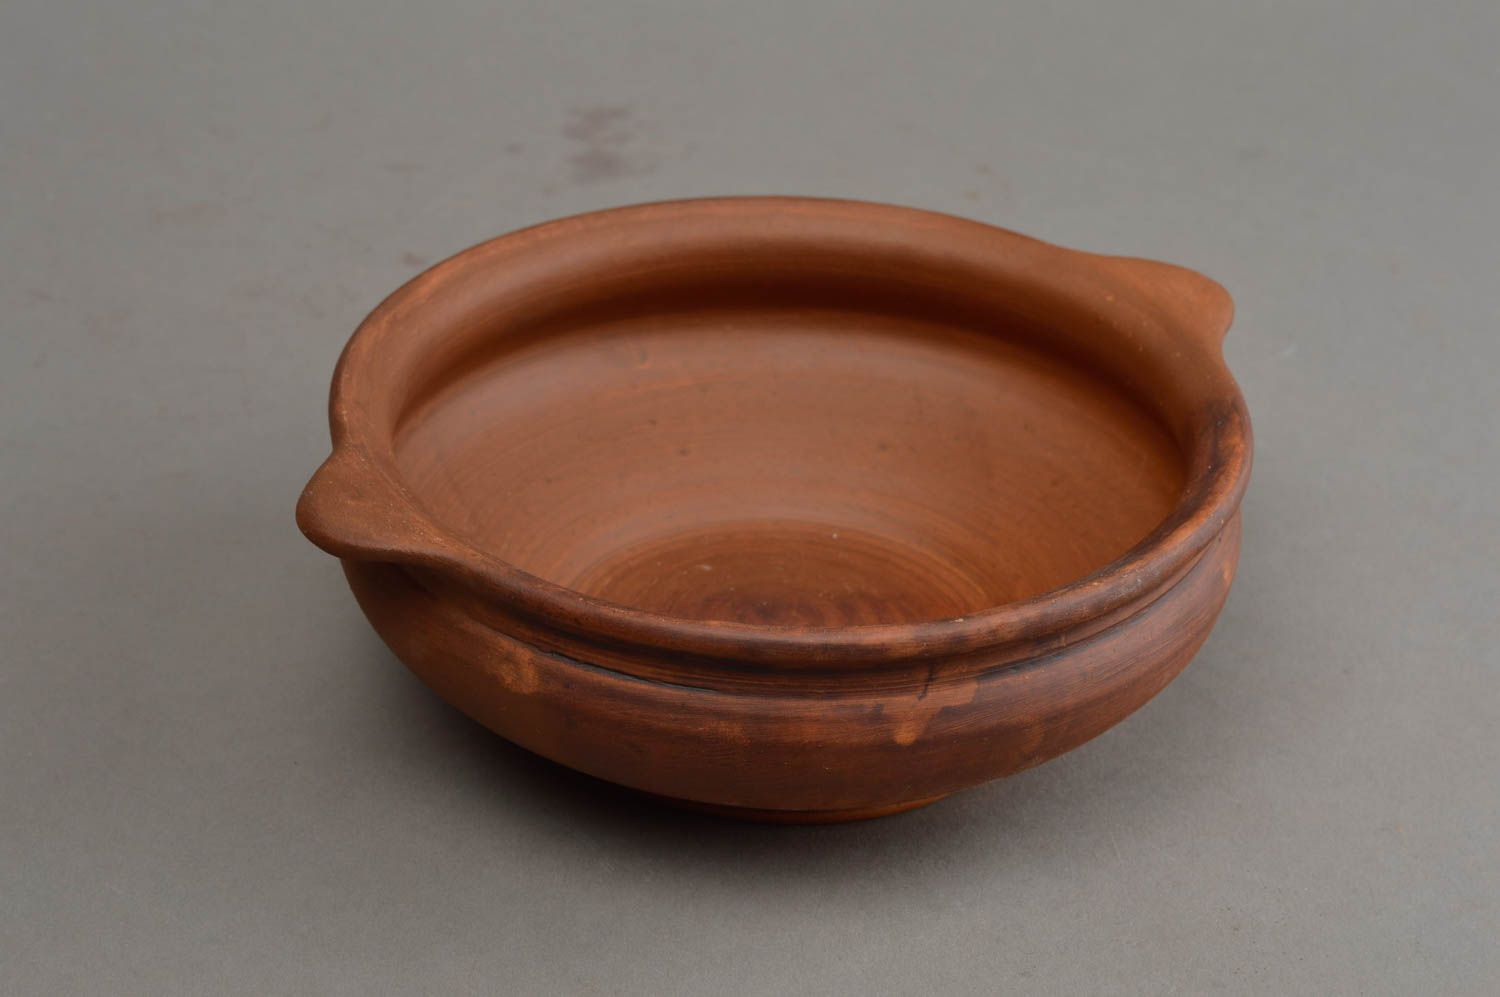 6 9 oz handmade terracotta cooking bowl with handles 0,84 lb photo 2